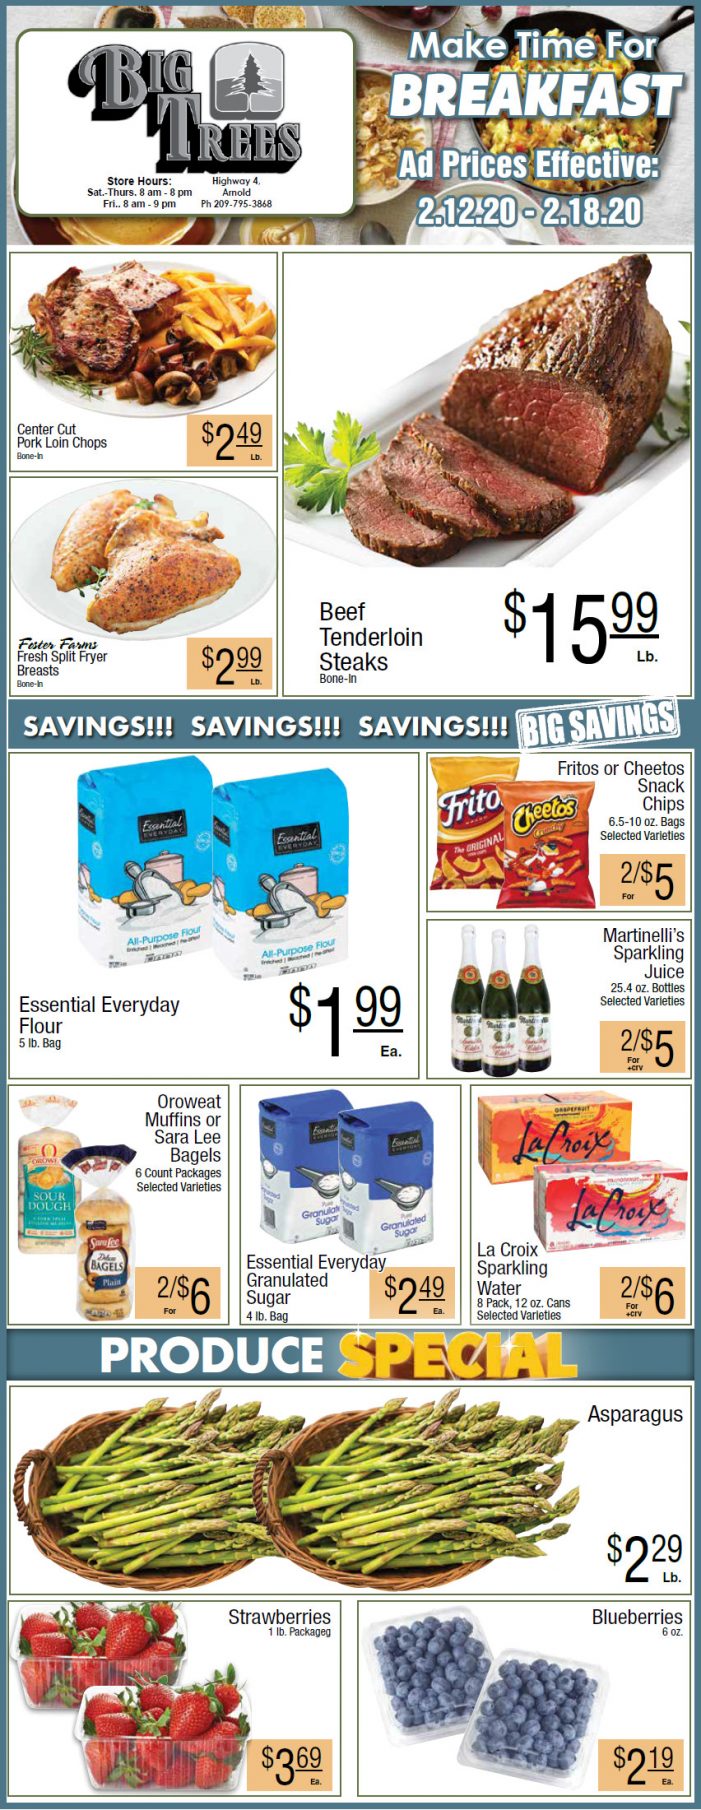 Big Trees Market Weekly Ad & Grocery Specials Through February 18th